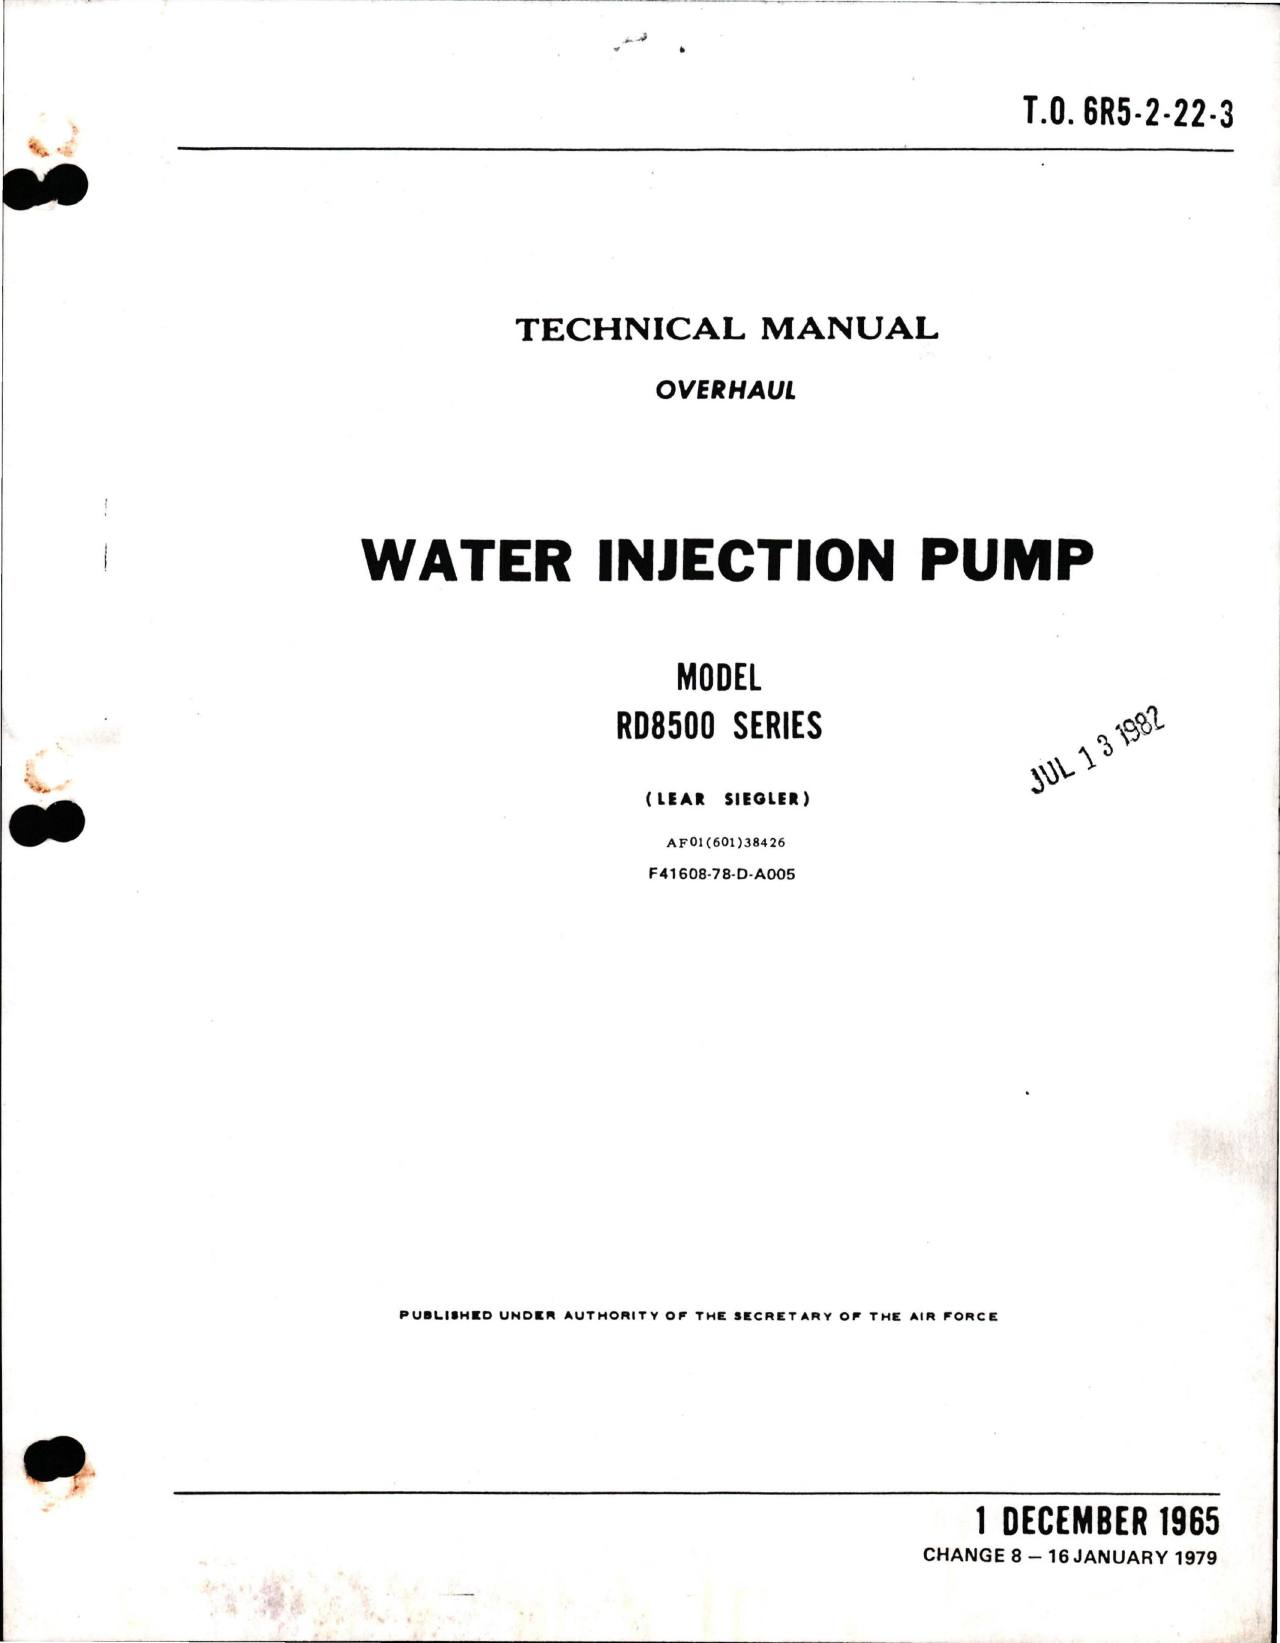 Sample page 1 from AirCorps Library document: Overhaul for Water Injection Pump - Model RD8500 Series